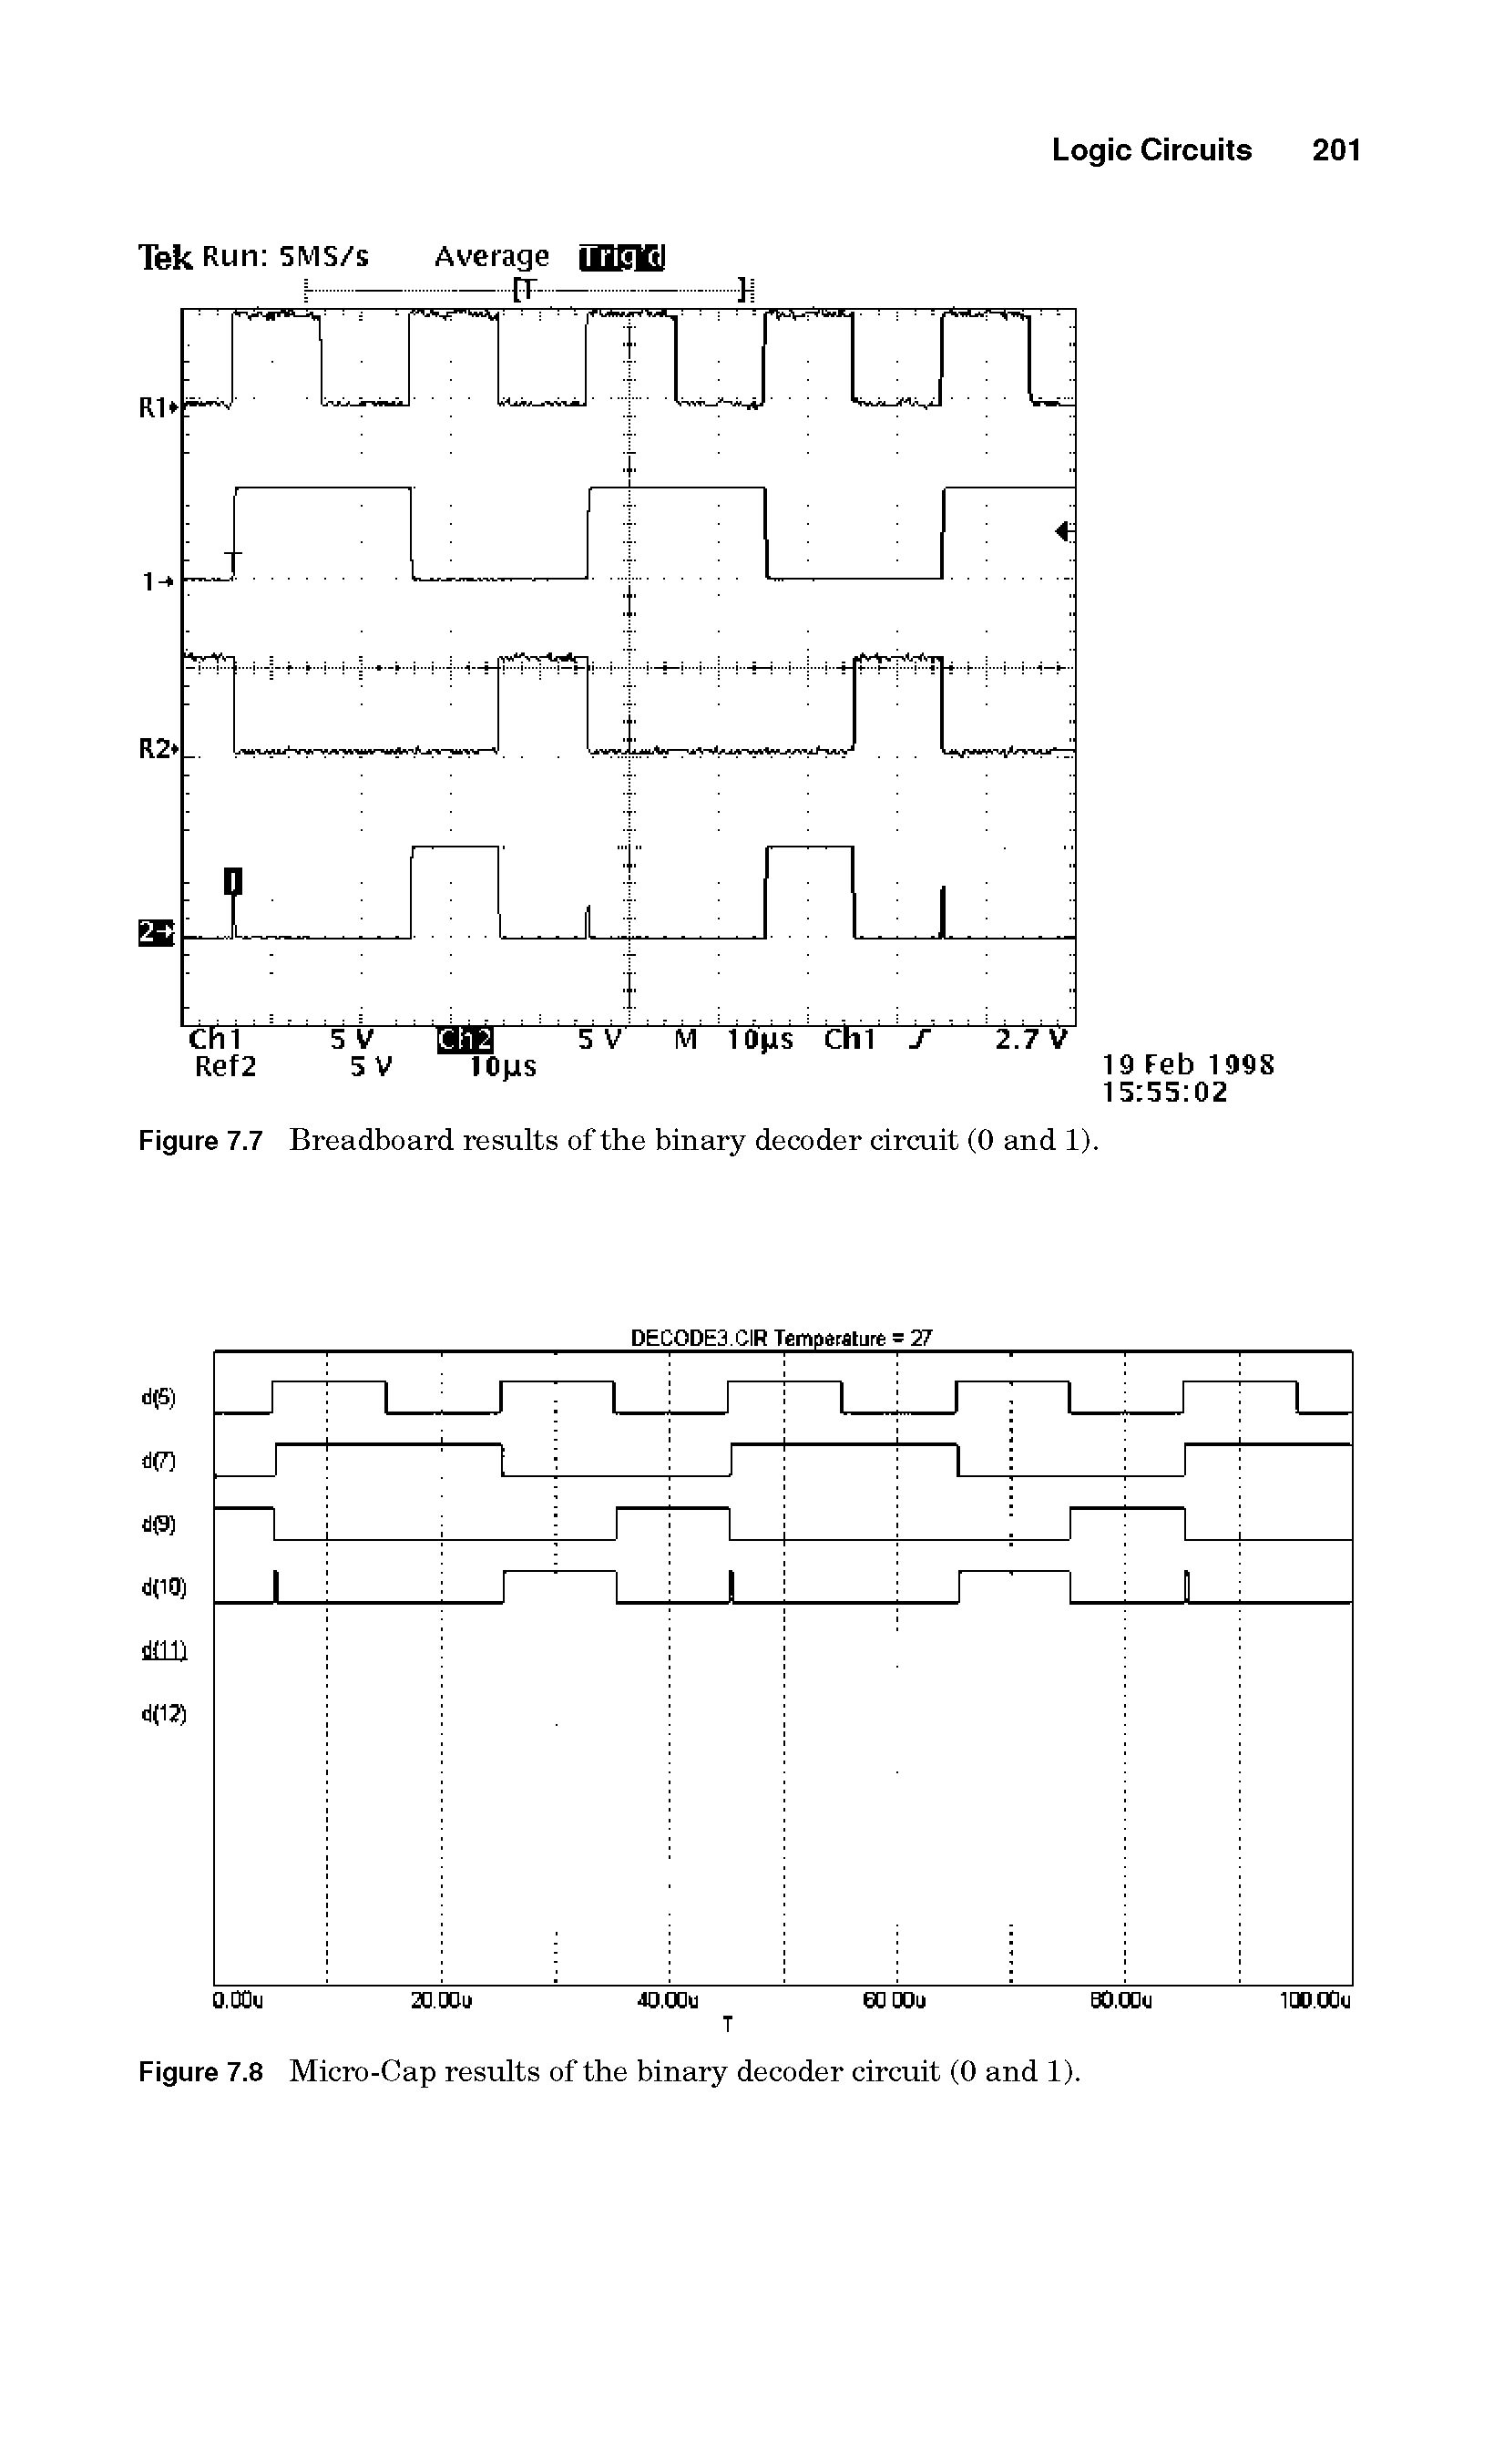 Figure 7.7 Breadboard results of the binary decoder circuit (0 and 1).